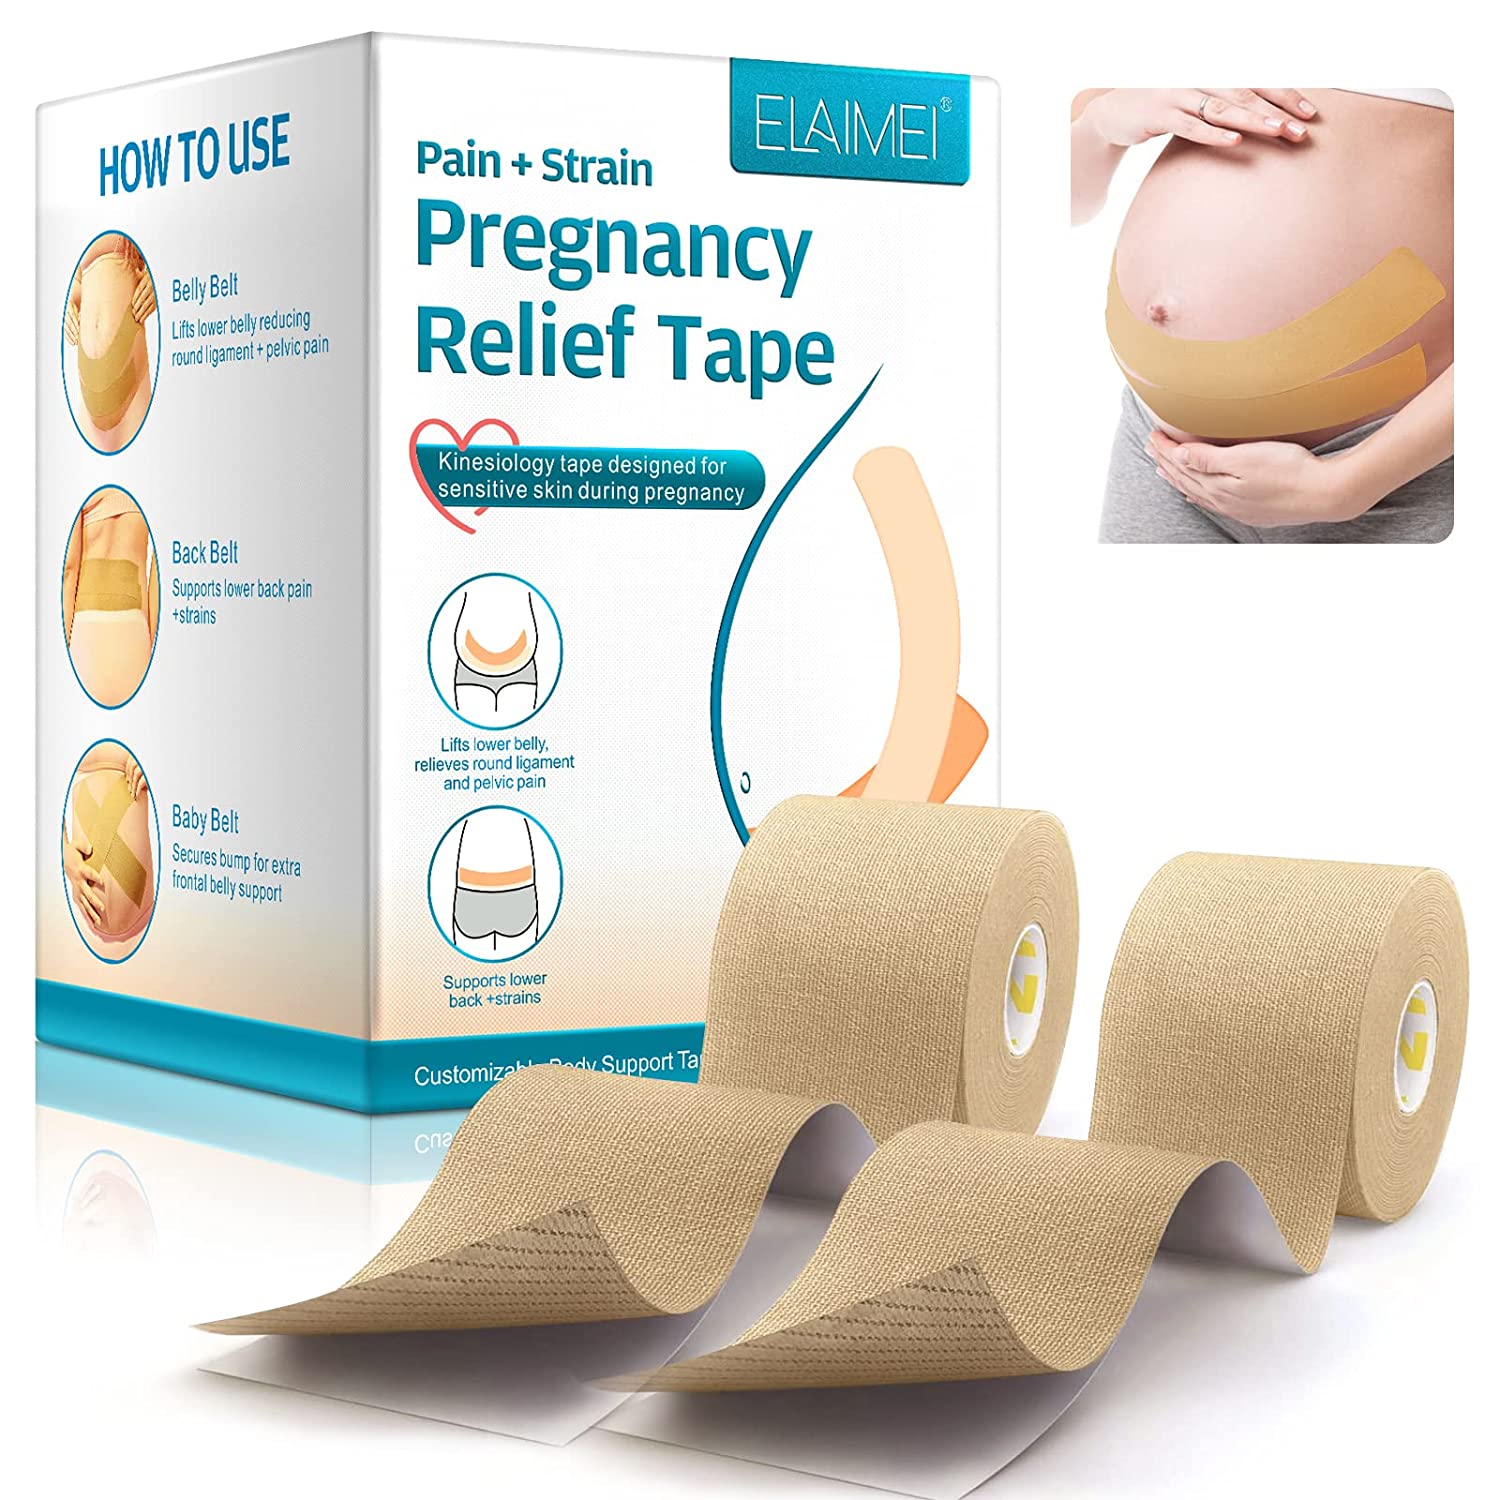 Maternity Belly Support Tape Archives - Ten Little Toes Co